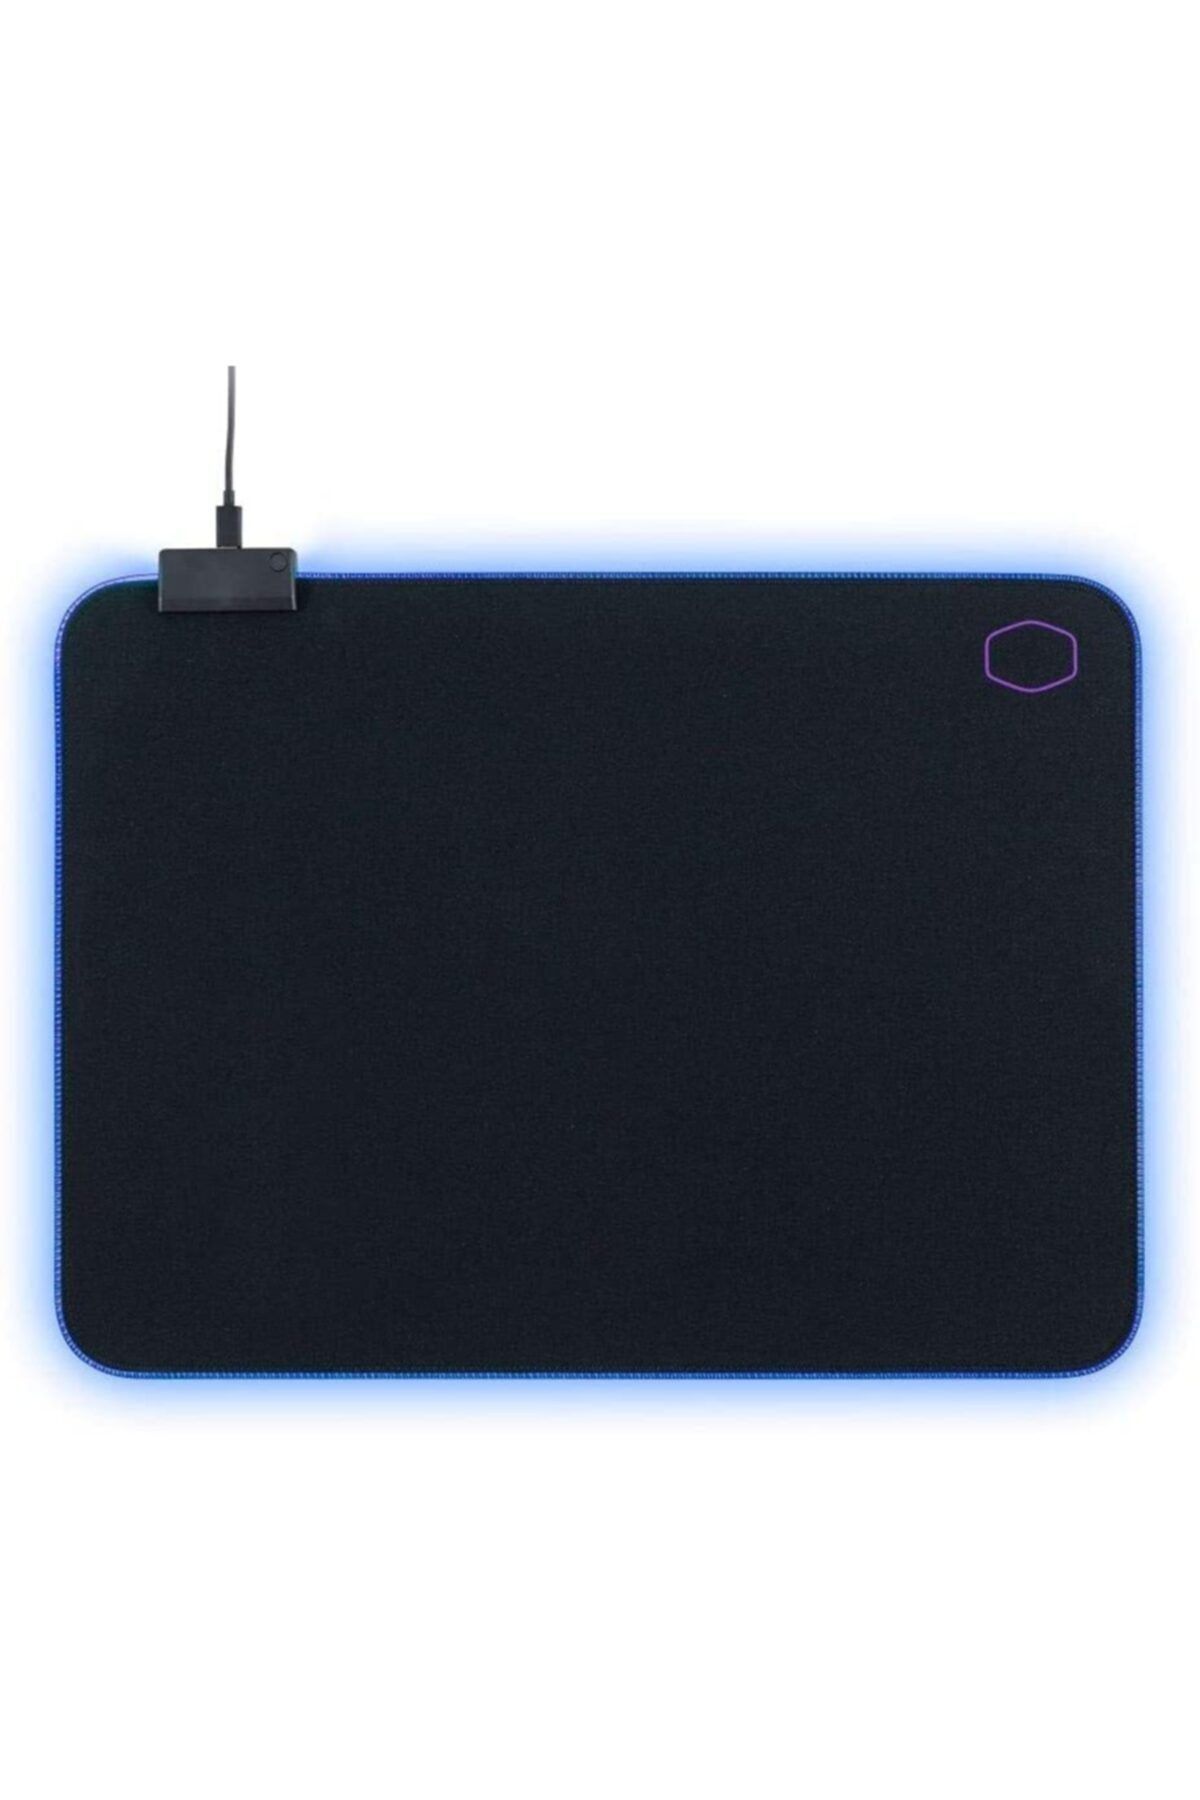 Cooler Master Mp750m Mouse Pad